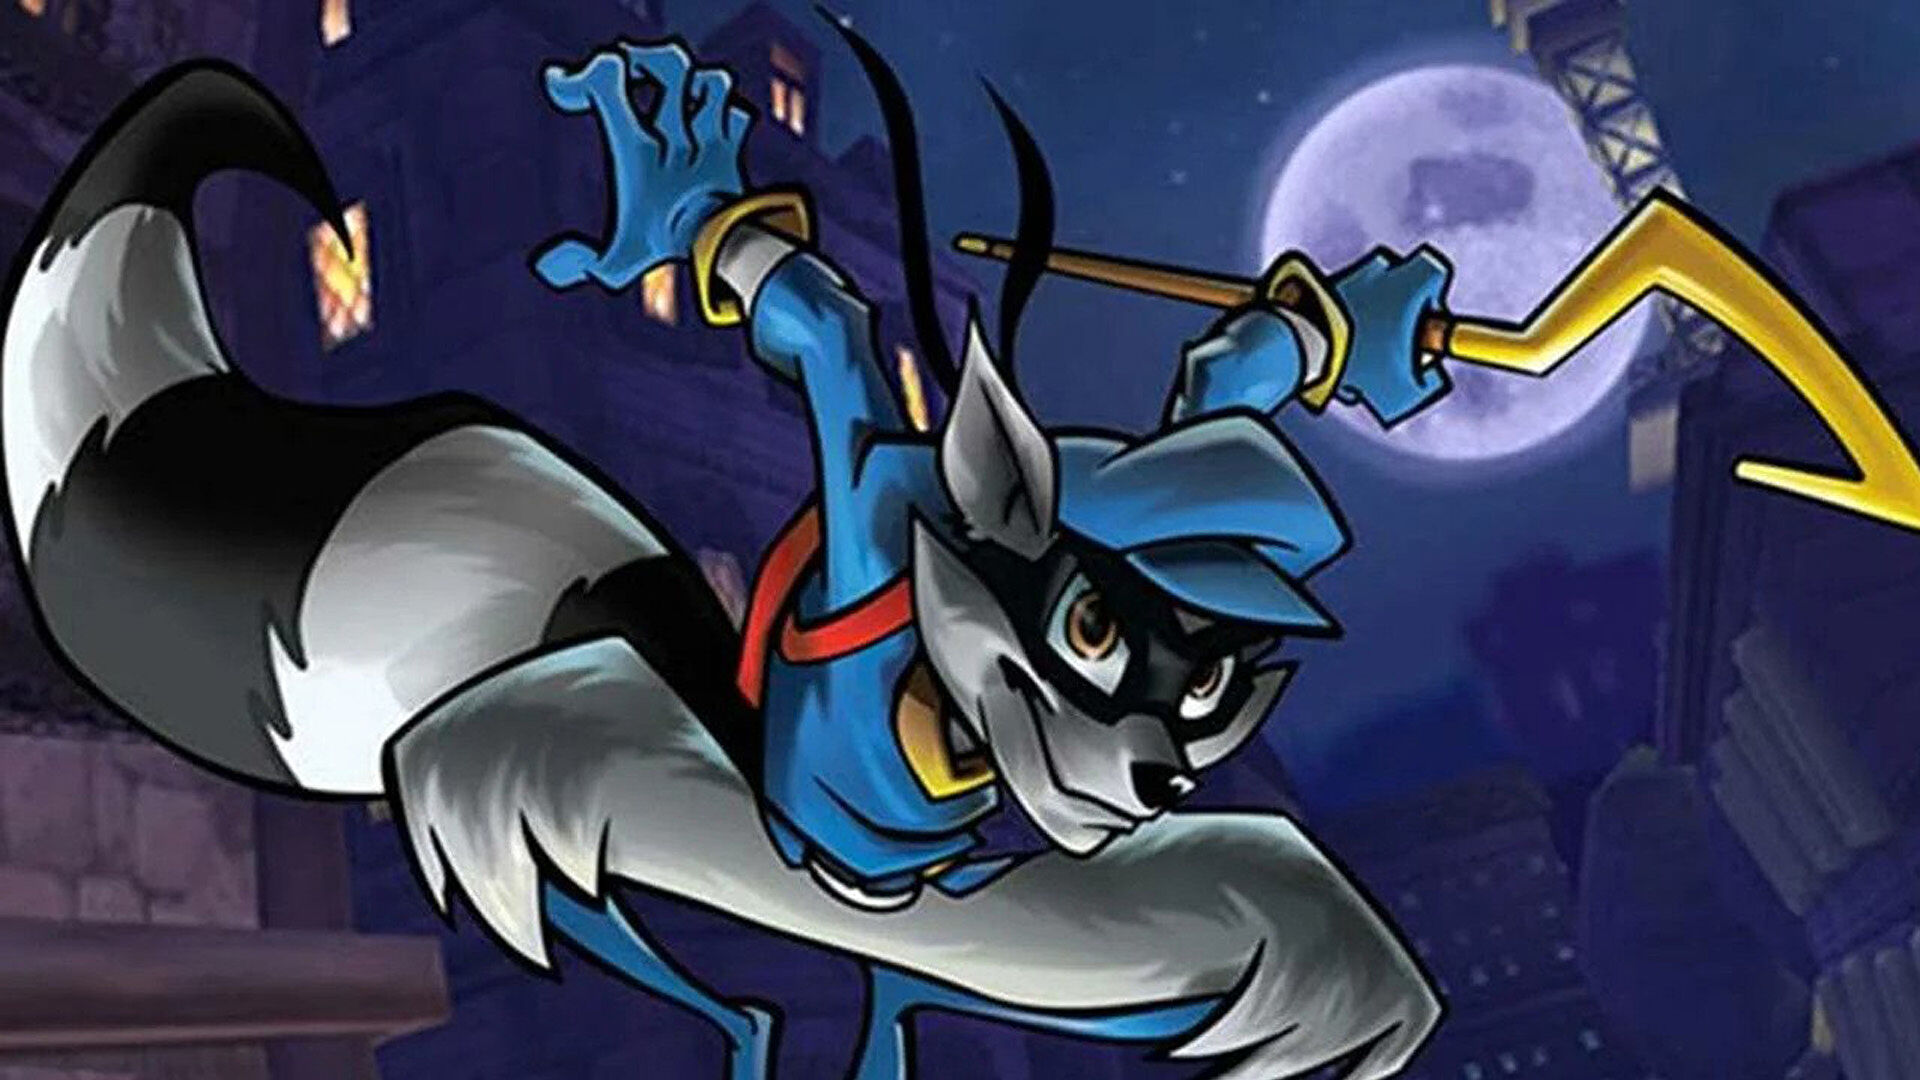 Sucker Punch gets Sly Cooper some merch for his 20th birthday